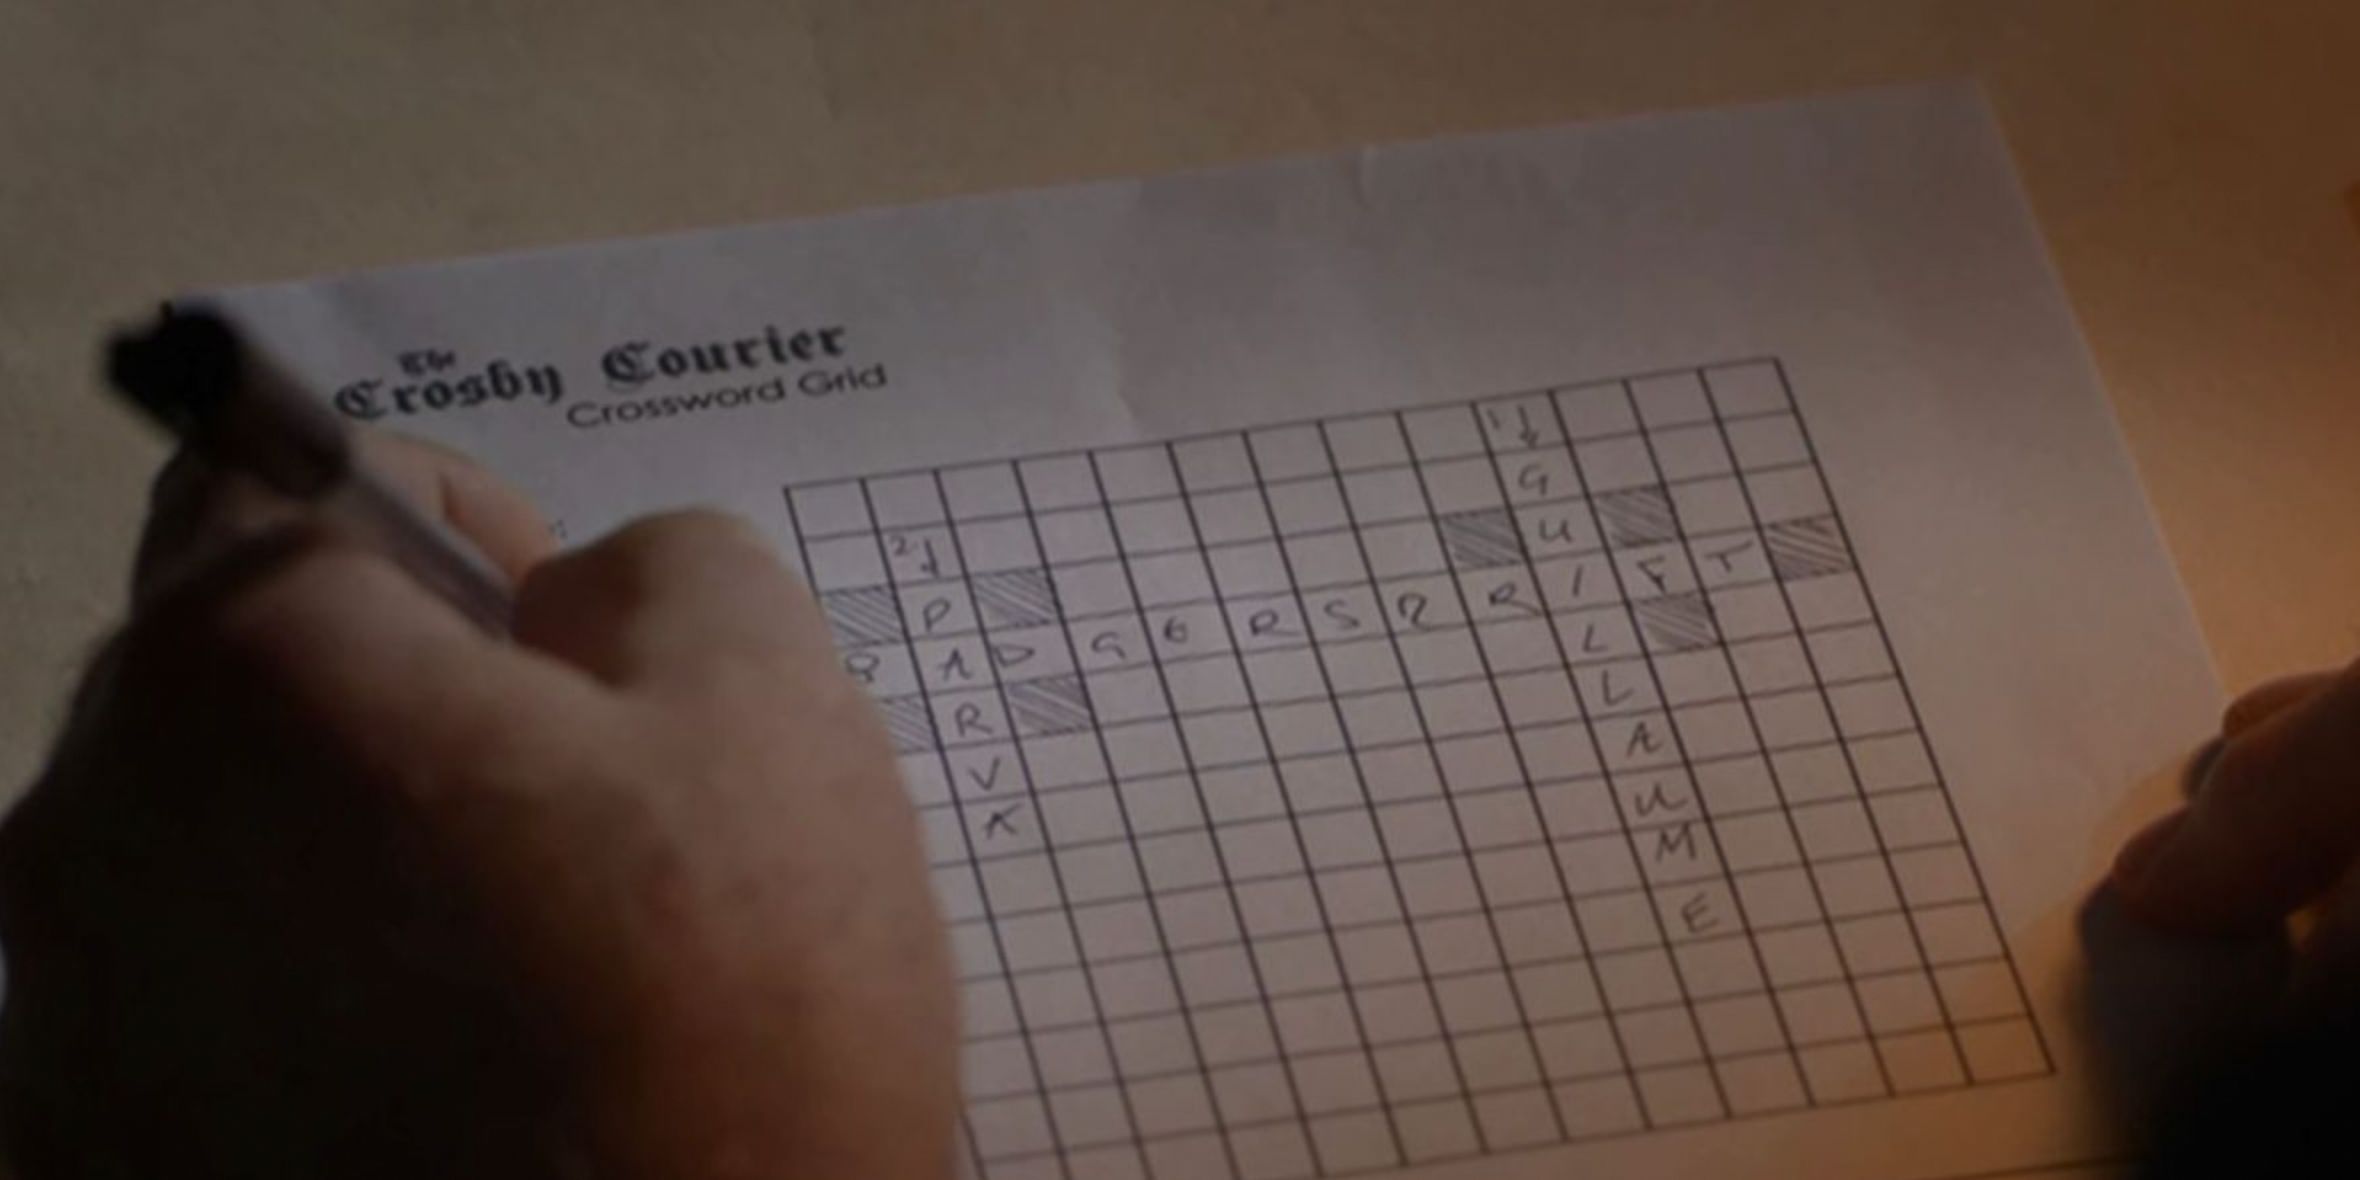 Crossword puzzle answers during the 10th anniversary episode of Midsomer Murders